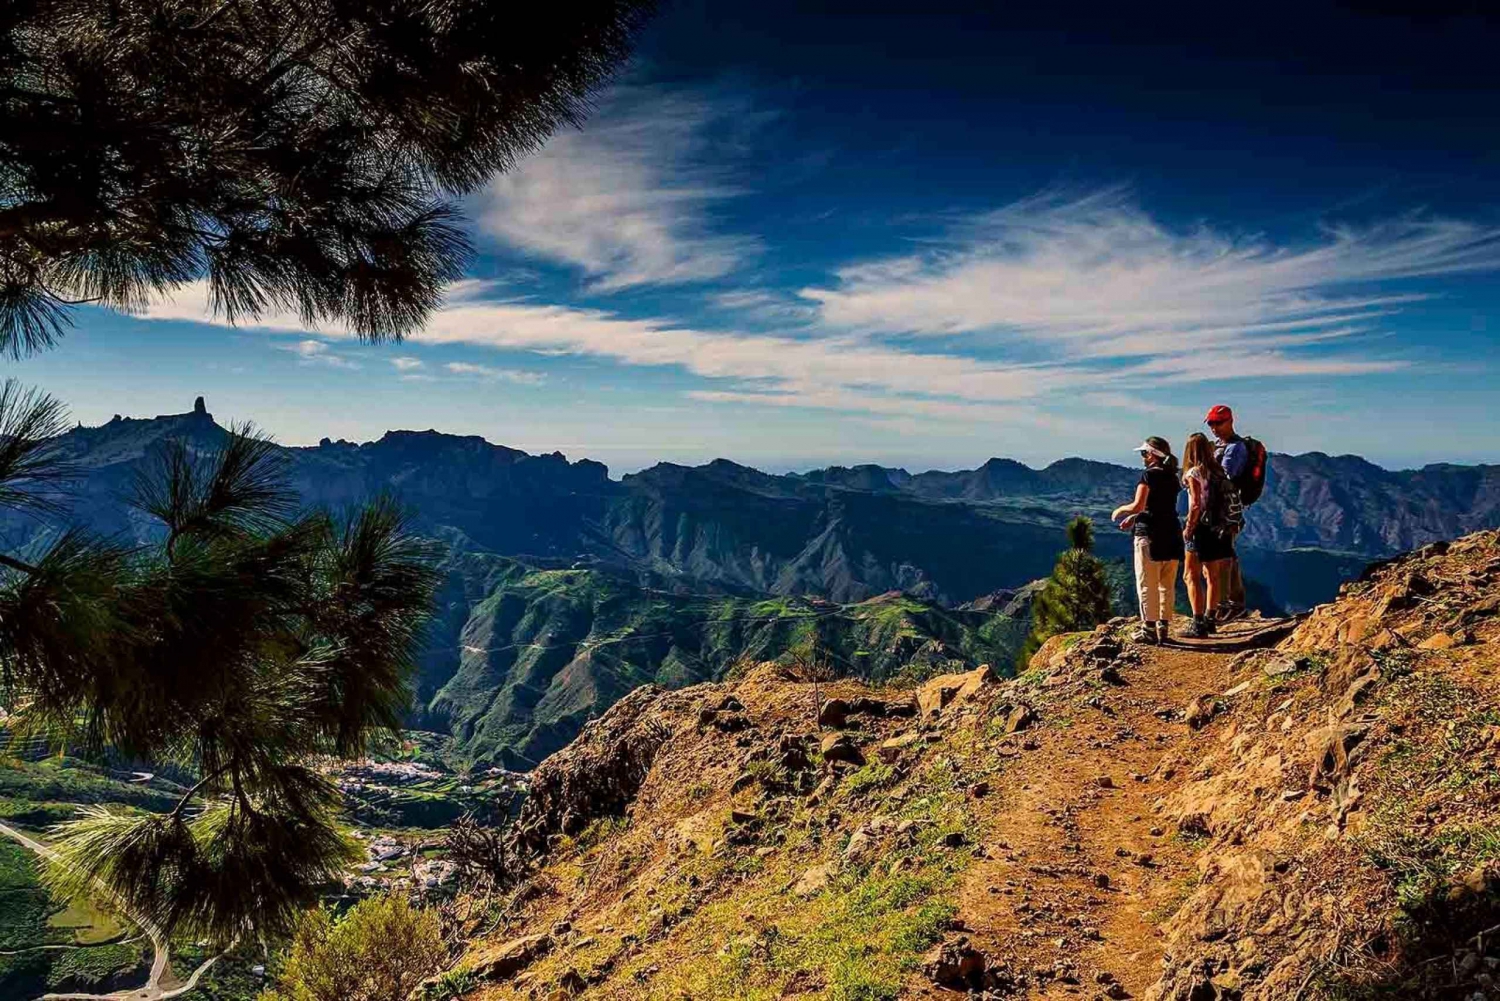 ROQUE NUBLO HIKING. PHOTO TOUR. ADVENTURE WITH A LOCAL GUIDE